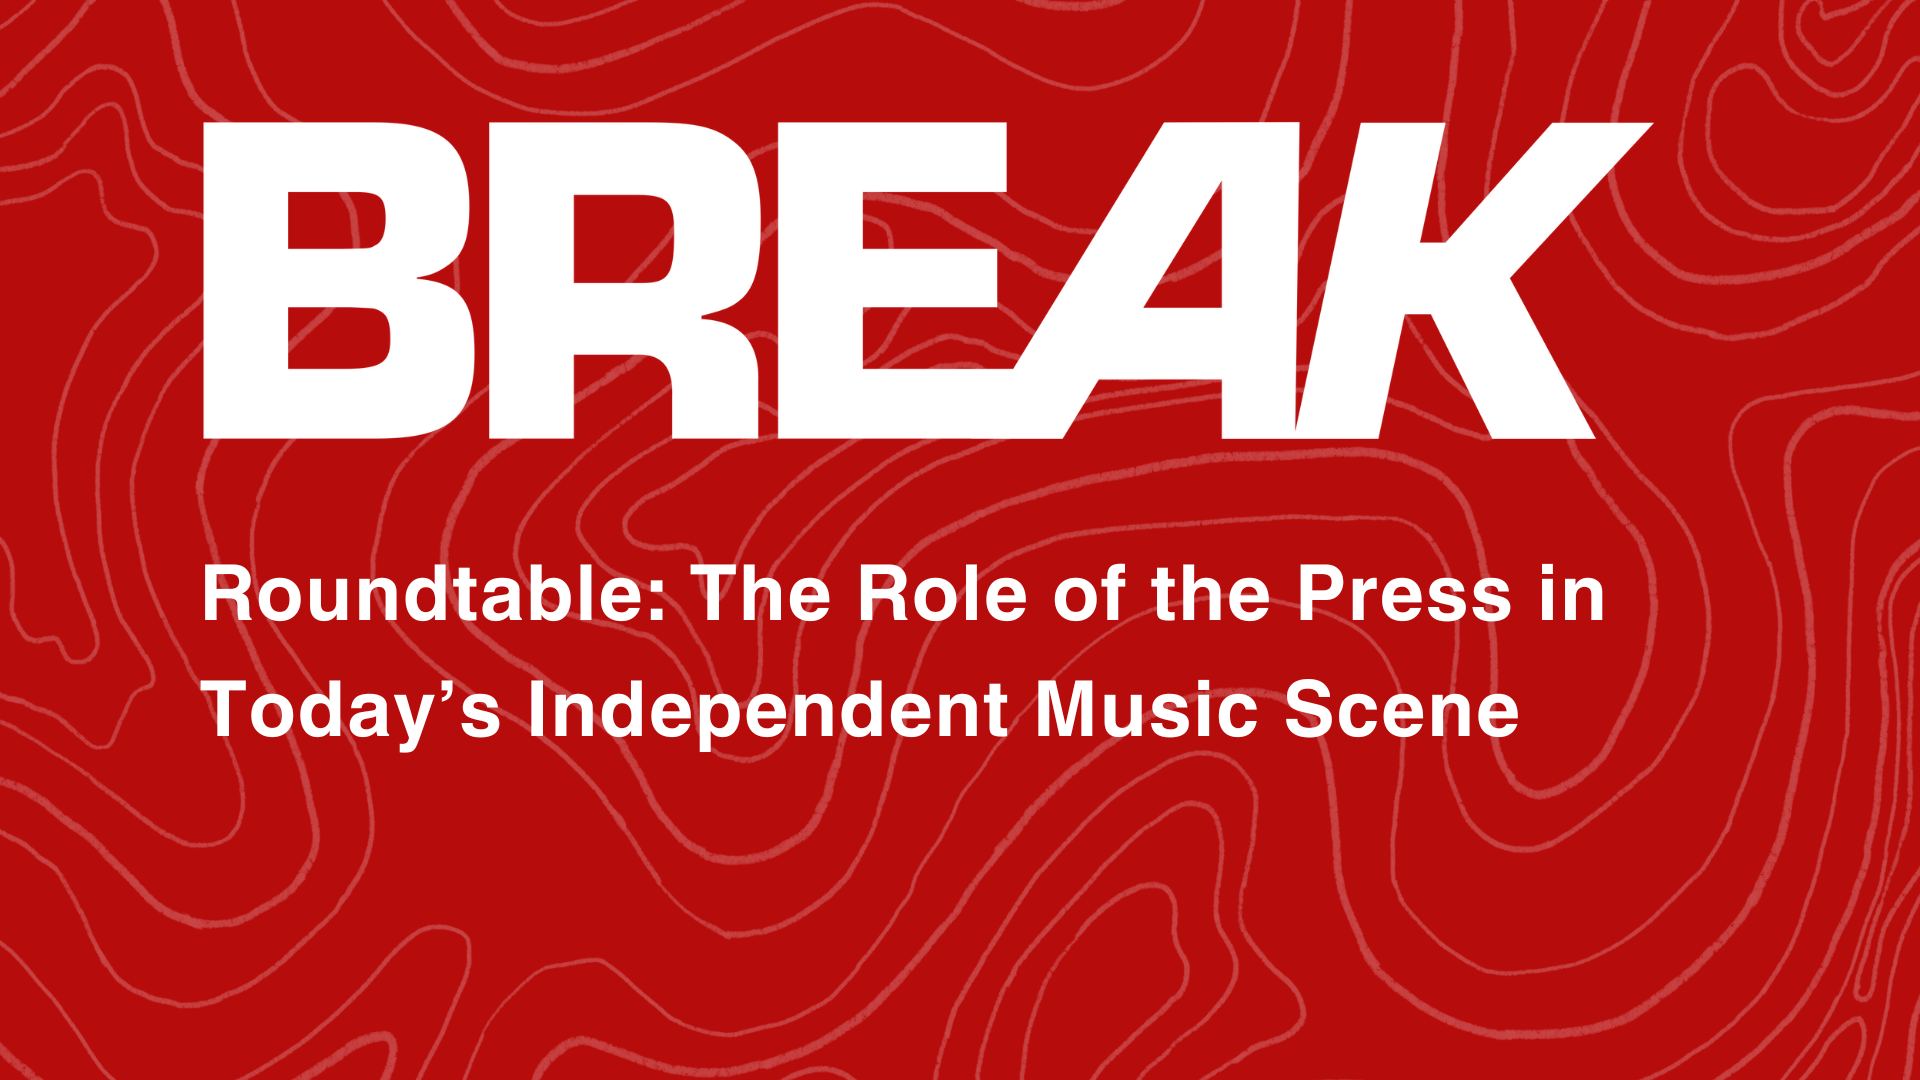 BREAK2023 // The Role of the Press in Today’s Independent Music Scene // Roundtable